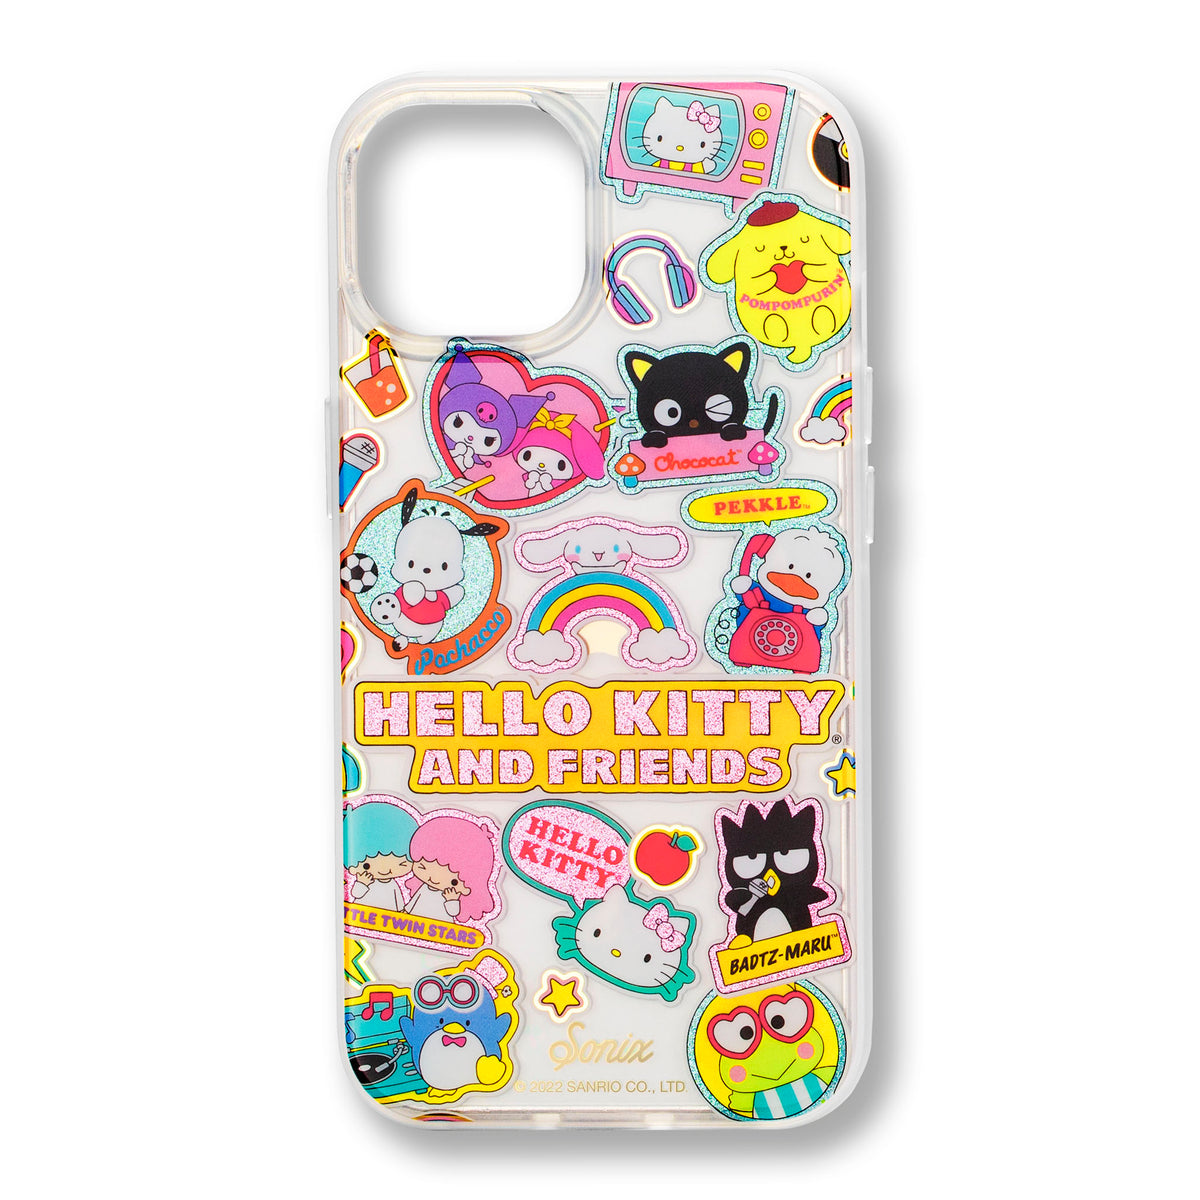 Hello Kitty and Friends x Sonix Supercute Stickers Airpods Max Cover